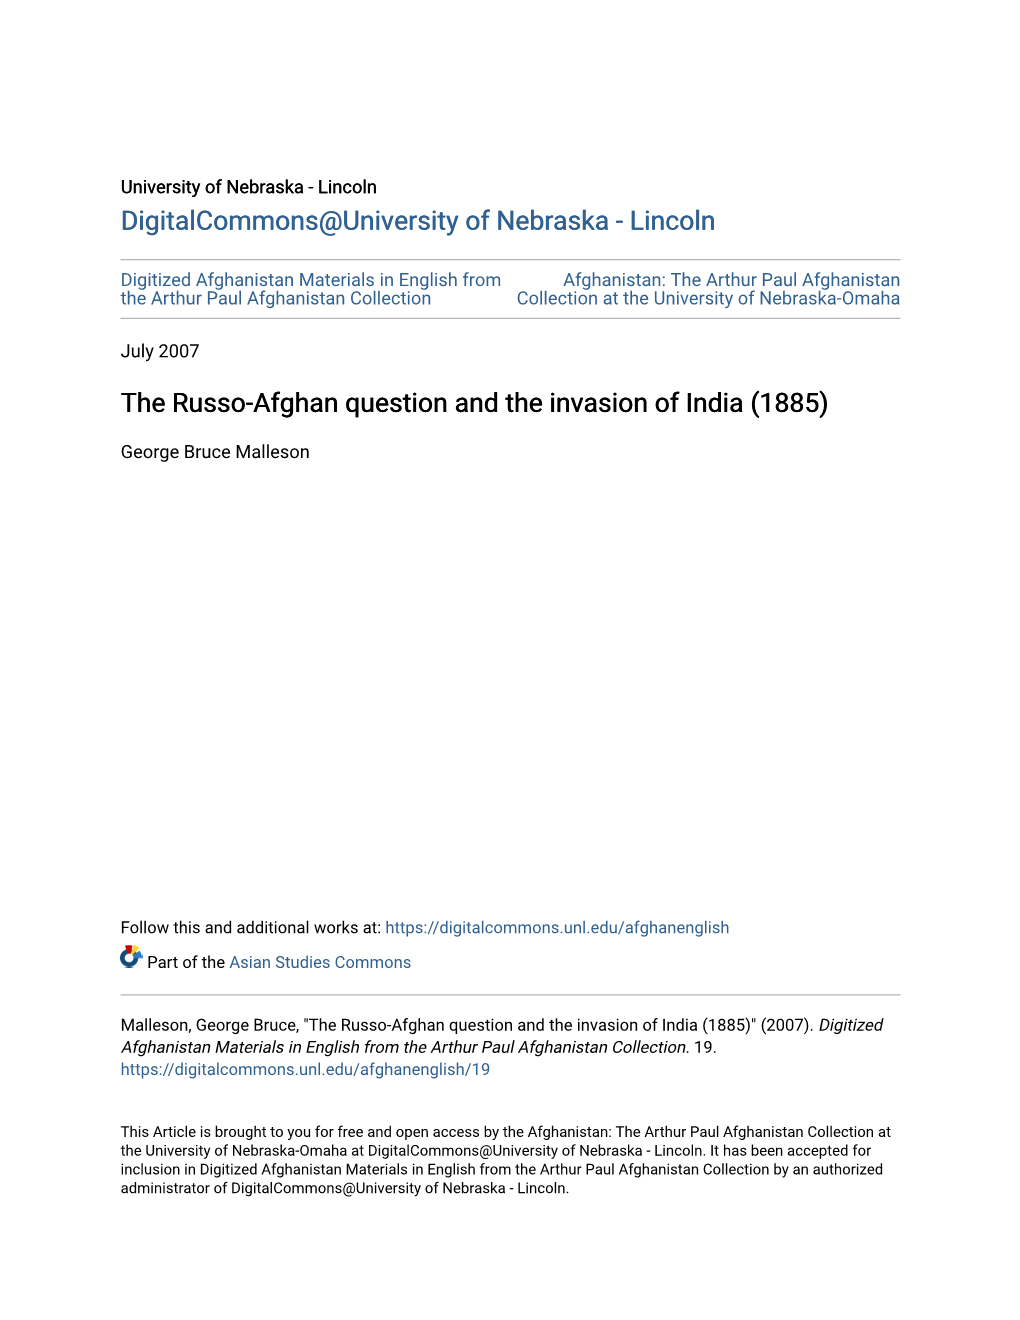 The Russo-Afghan Question and the Invasion of India (1885)